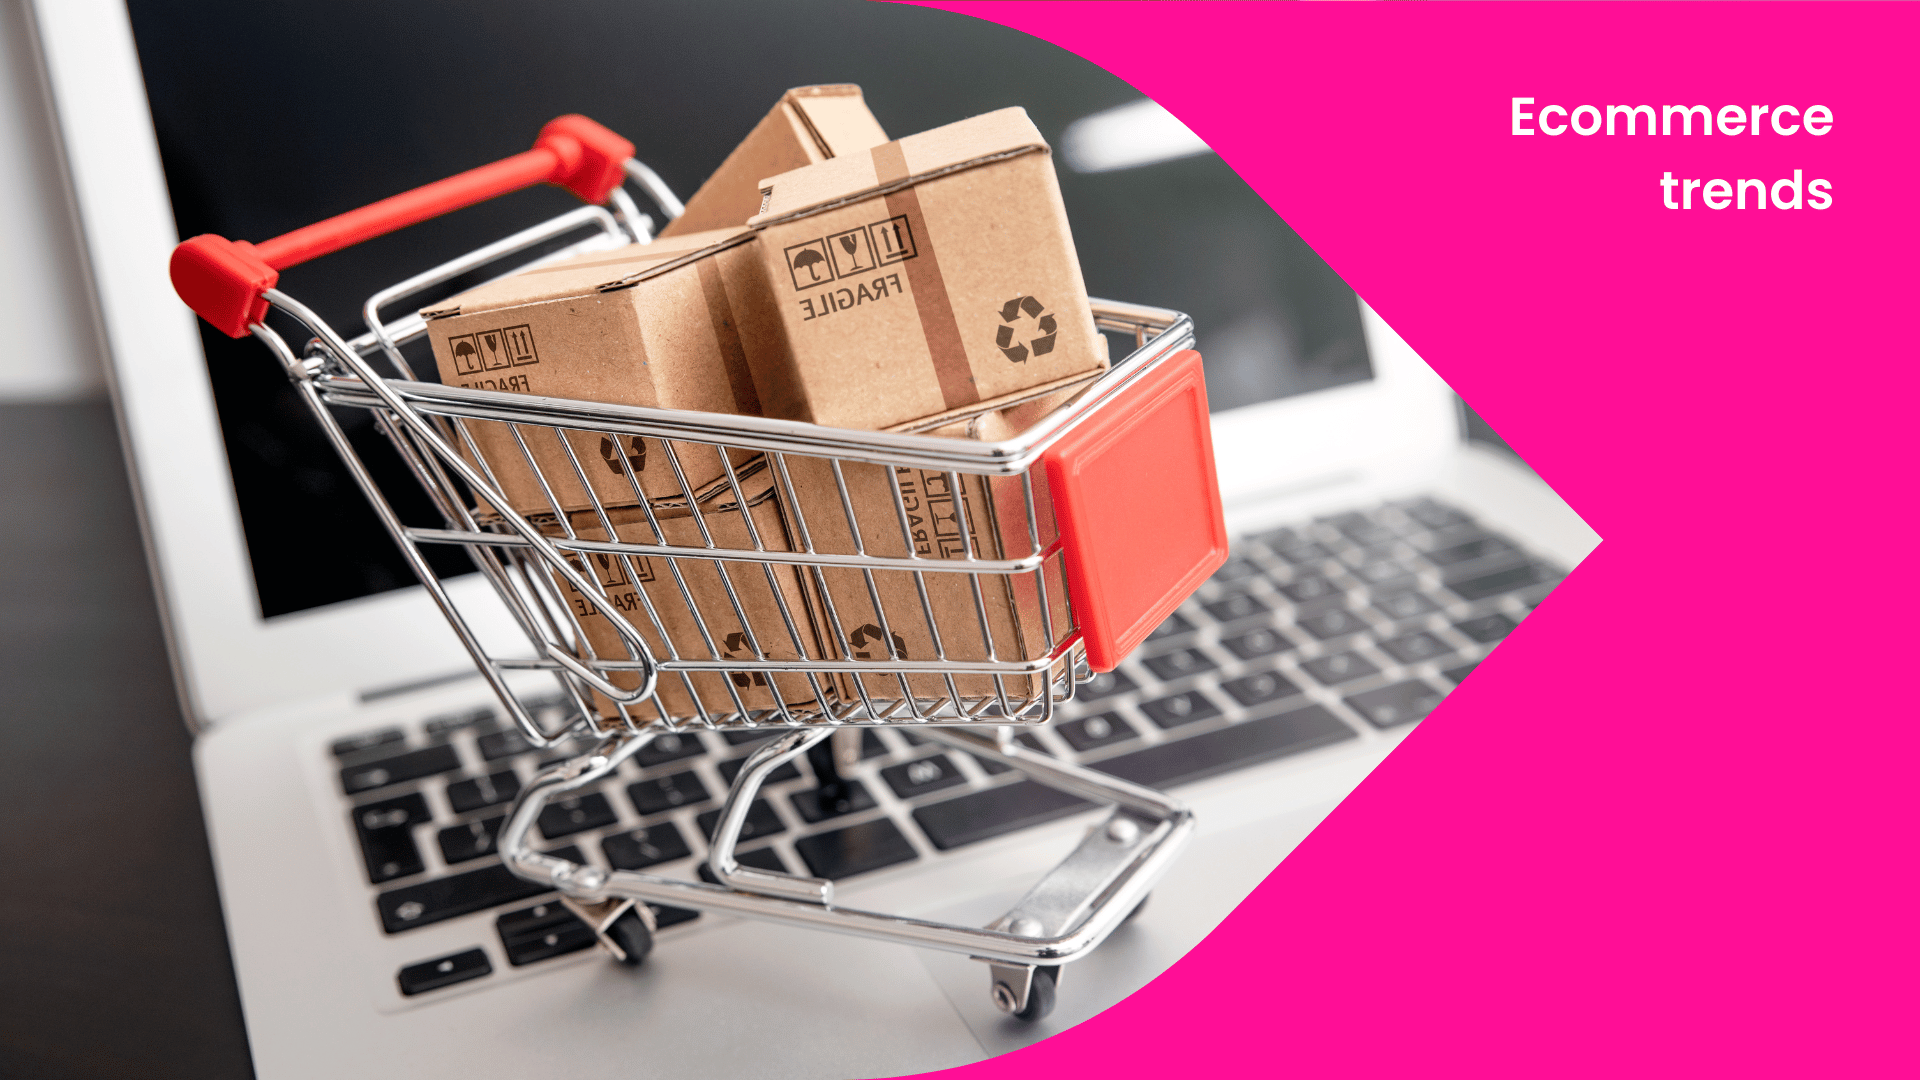 Key ecommerce trends to know